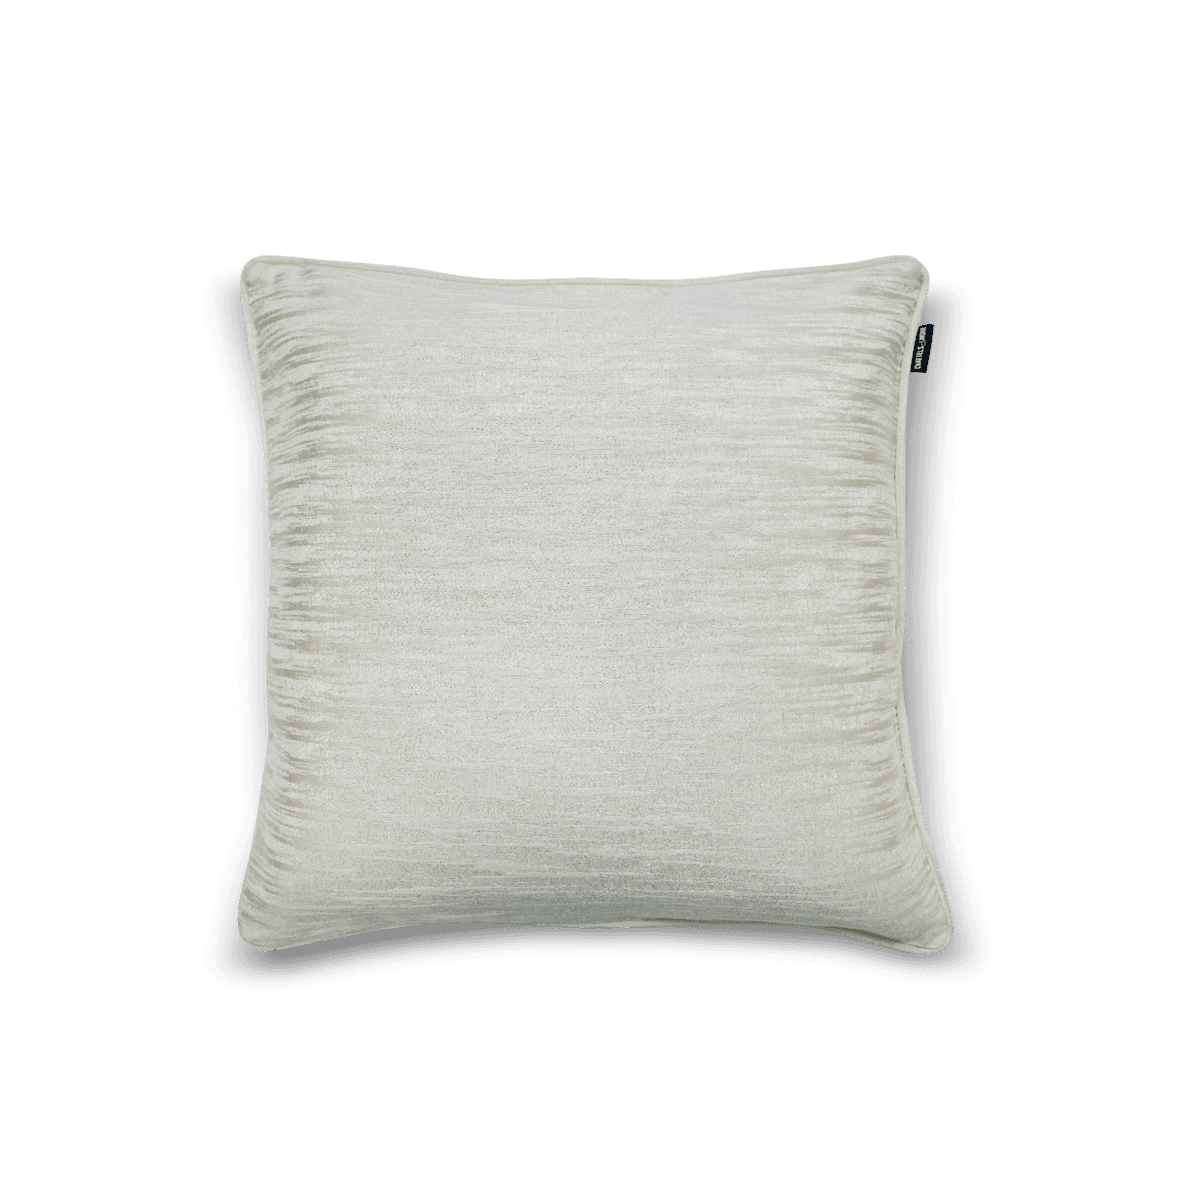 Cushion Resty Bianca with Filler, Beige